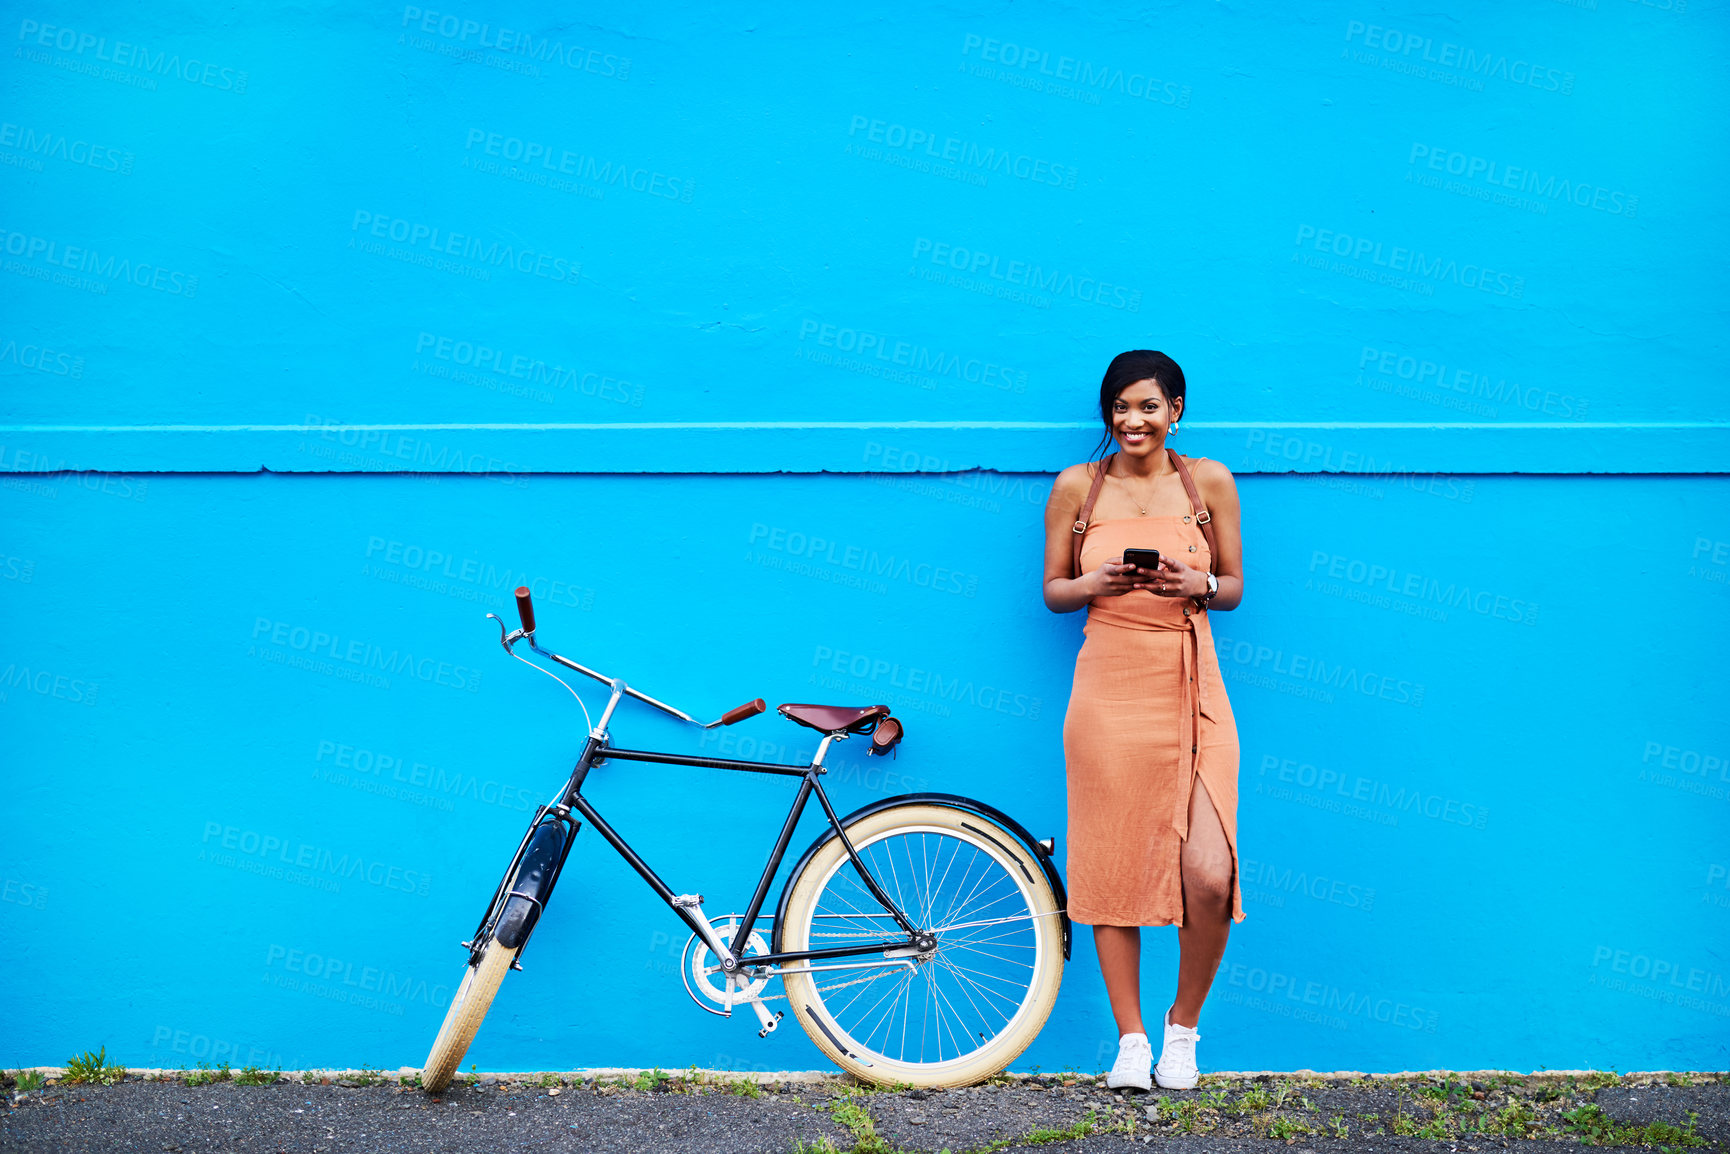 Buy stock photo Full length shot of an attractive young woman using a cellphone while standing next to her bicycle doors